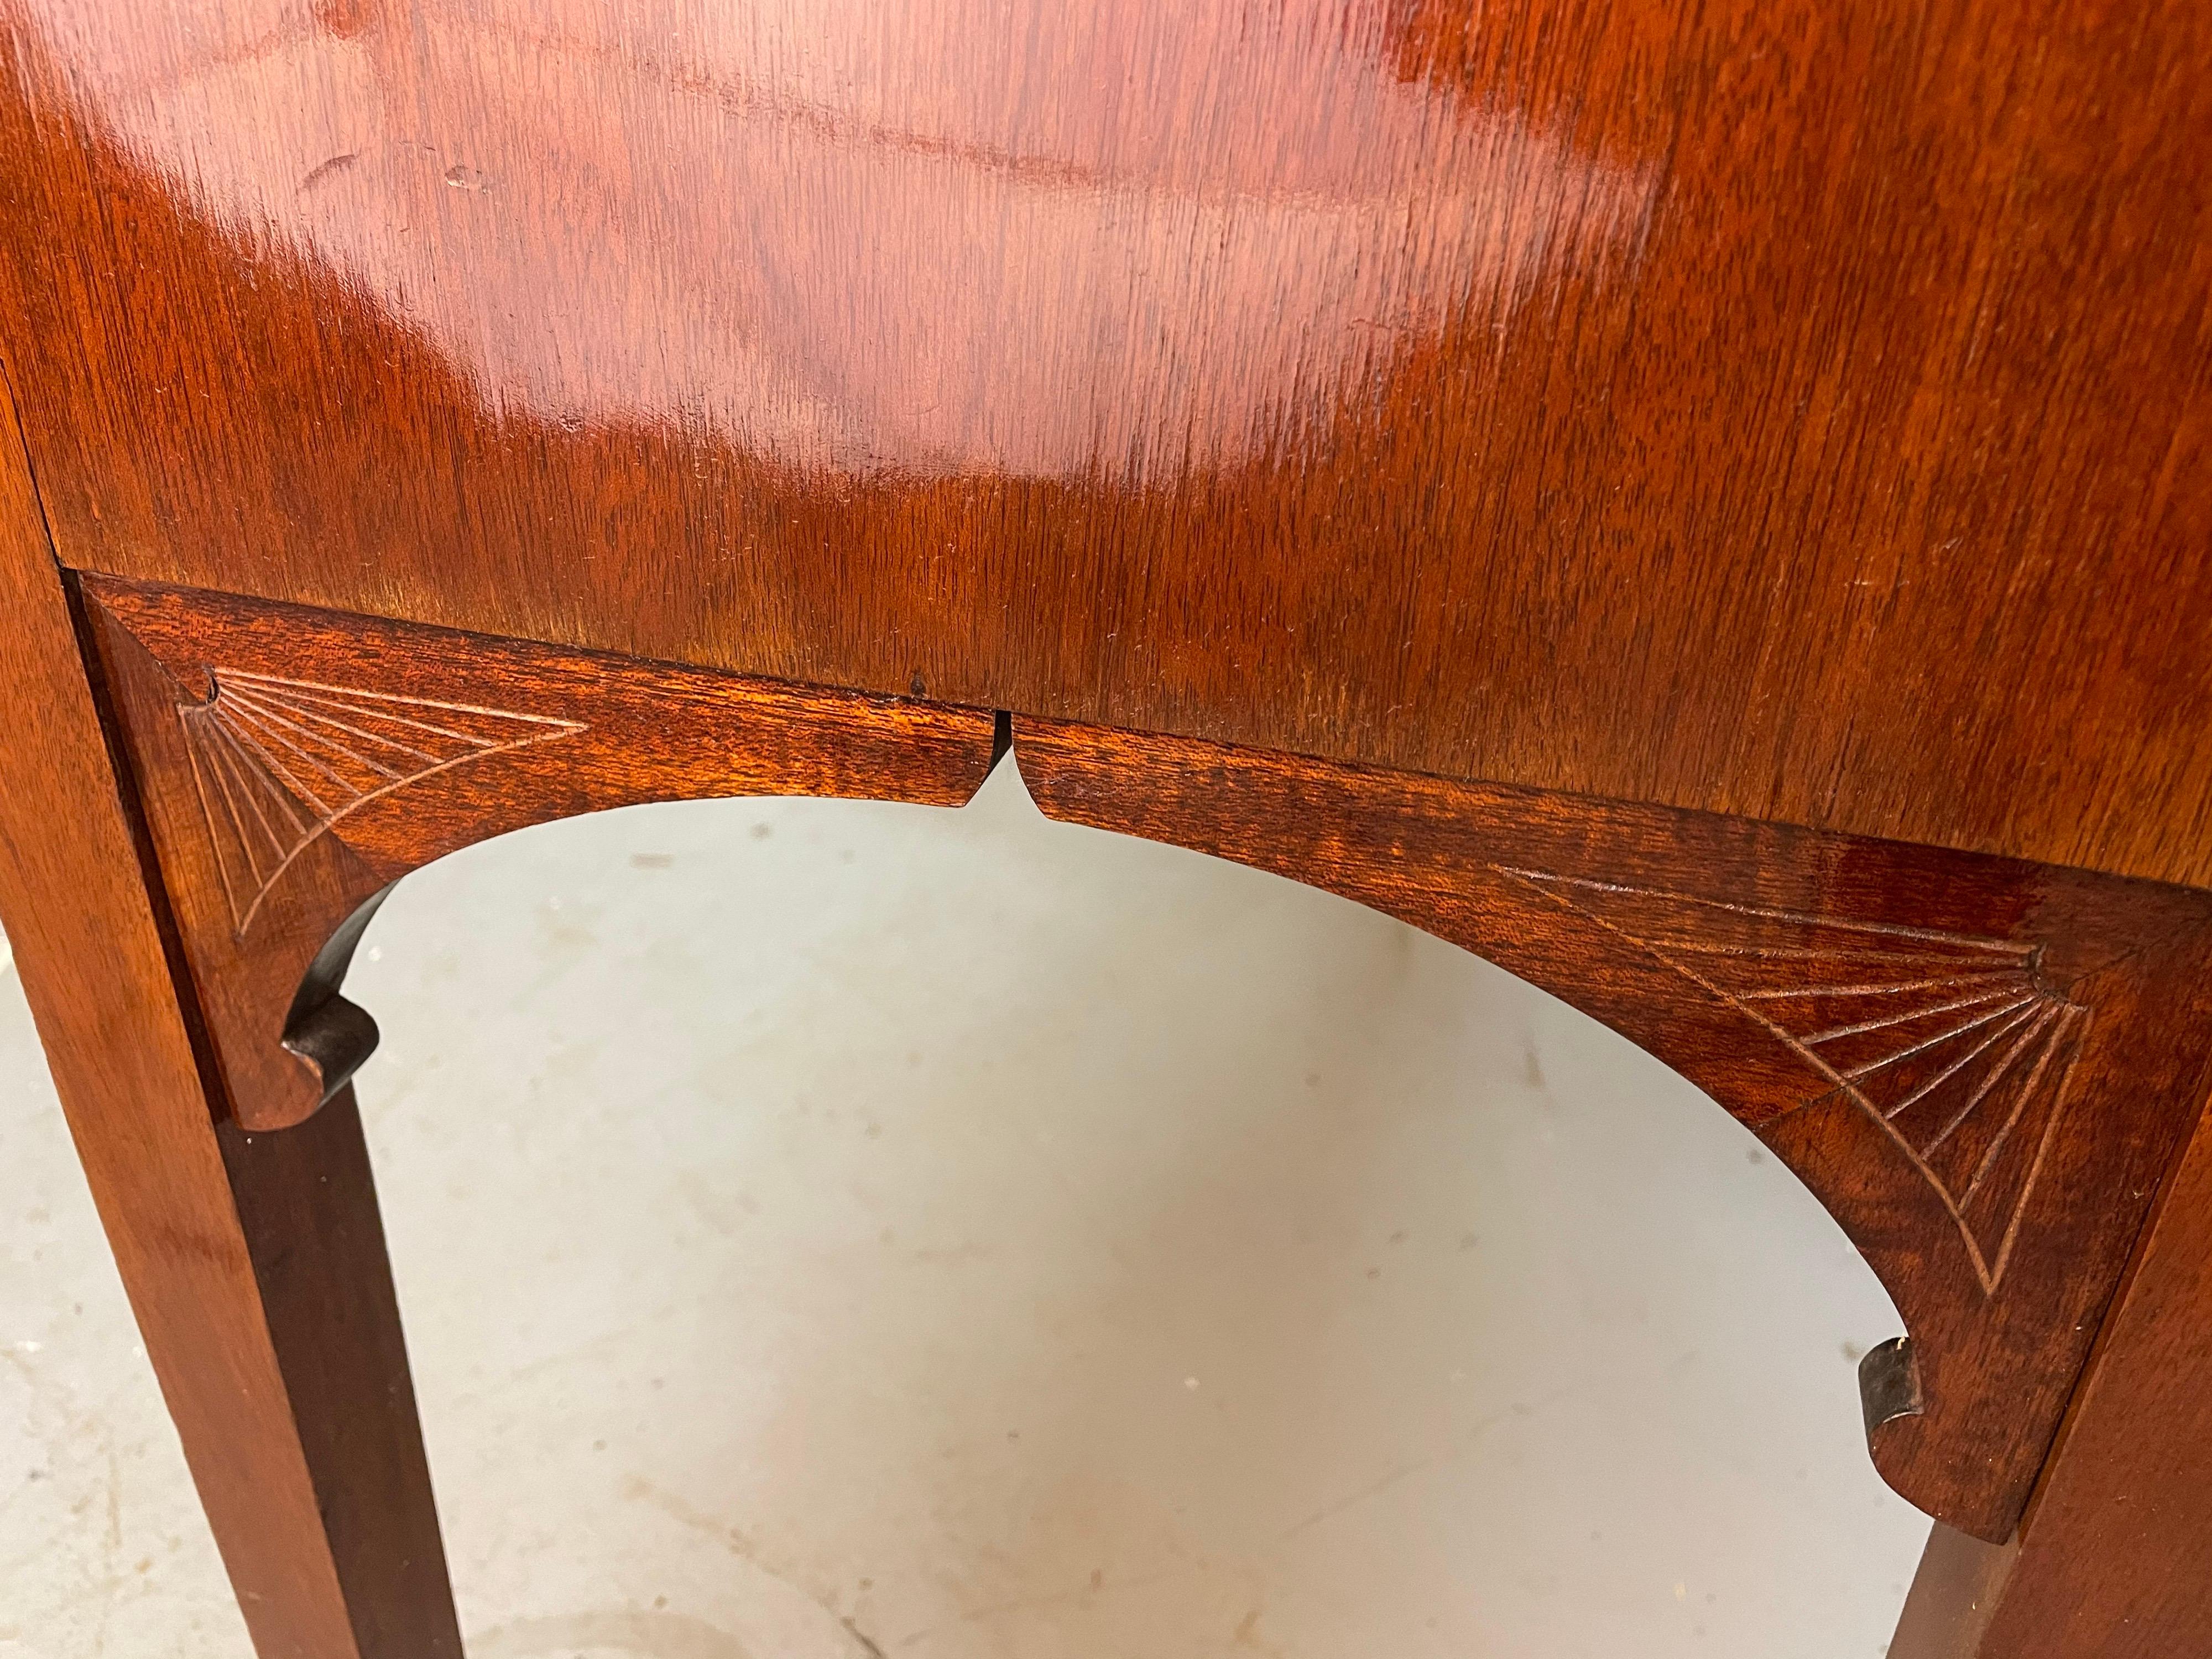 Swedish Art Nouveau Mahogany Vanity Desk And Mirror Made In Sweden For Sale